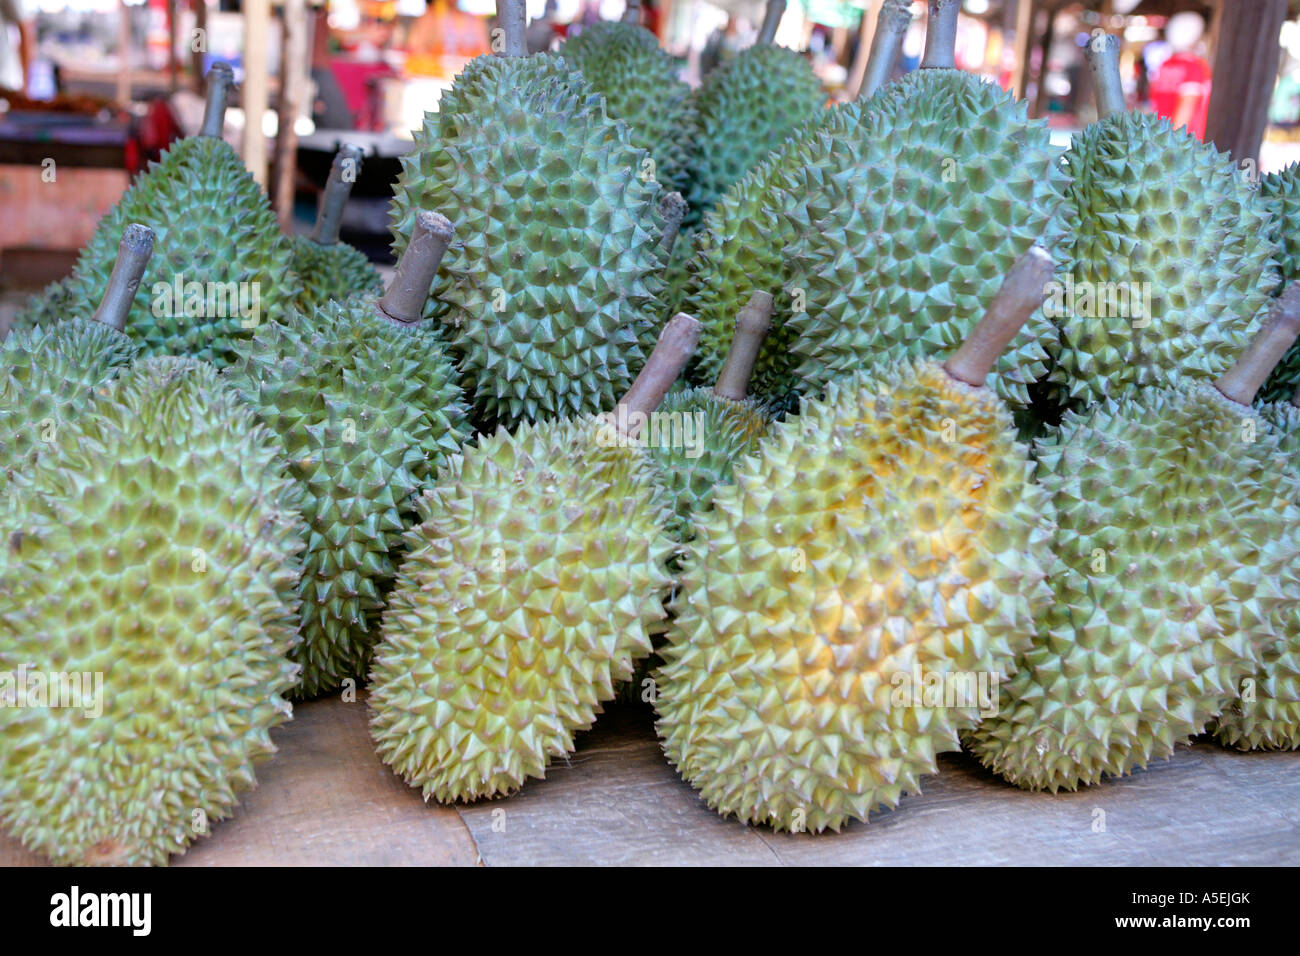 tropical fruits on market in Thailand Stock Photo